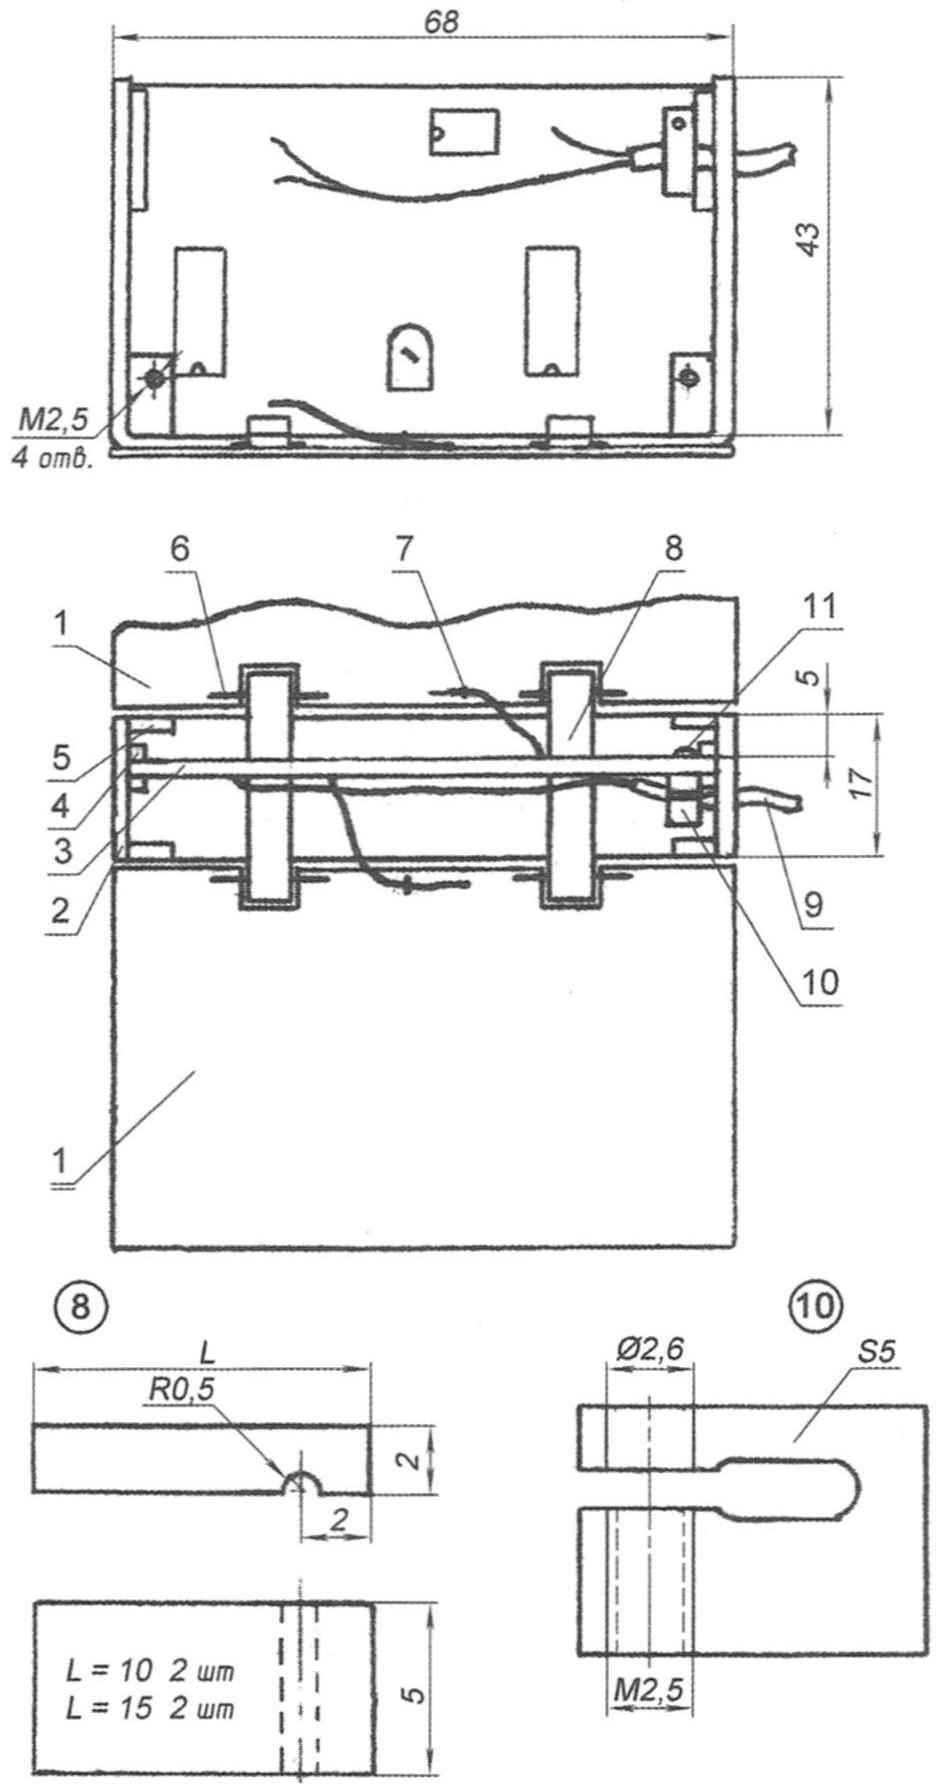 Fig. 4. Contactless pedal